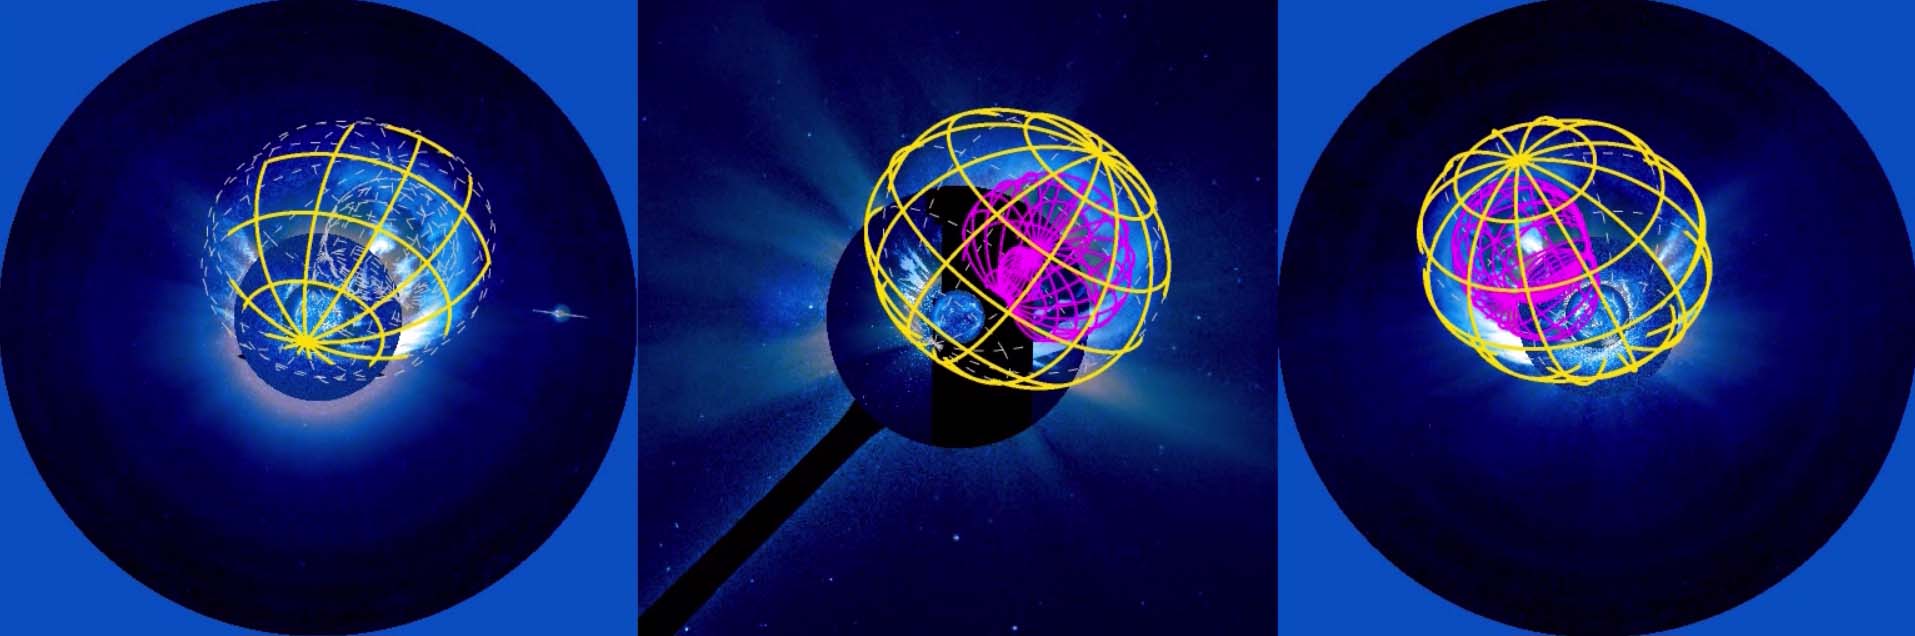 A visualization of a coronal mass ejection, or CME, from three angles using data from three NASA missions. In each of the three panels, a bright yellow, hollow globe surrounds the small blue disk of the Sun, and two of the globes have smaller, lumpy magenta globes inside.